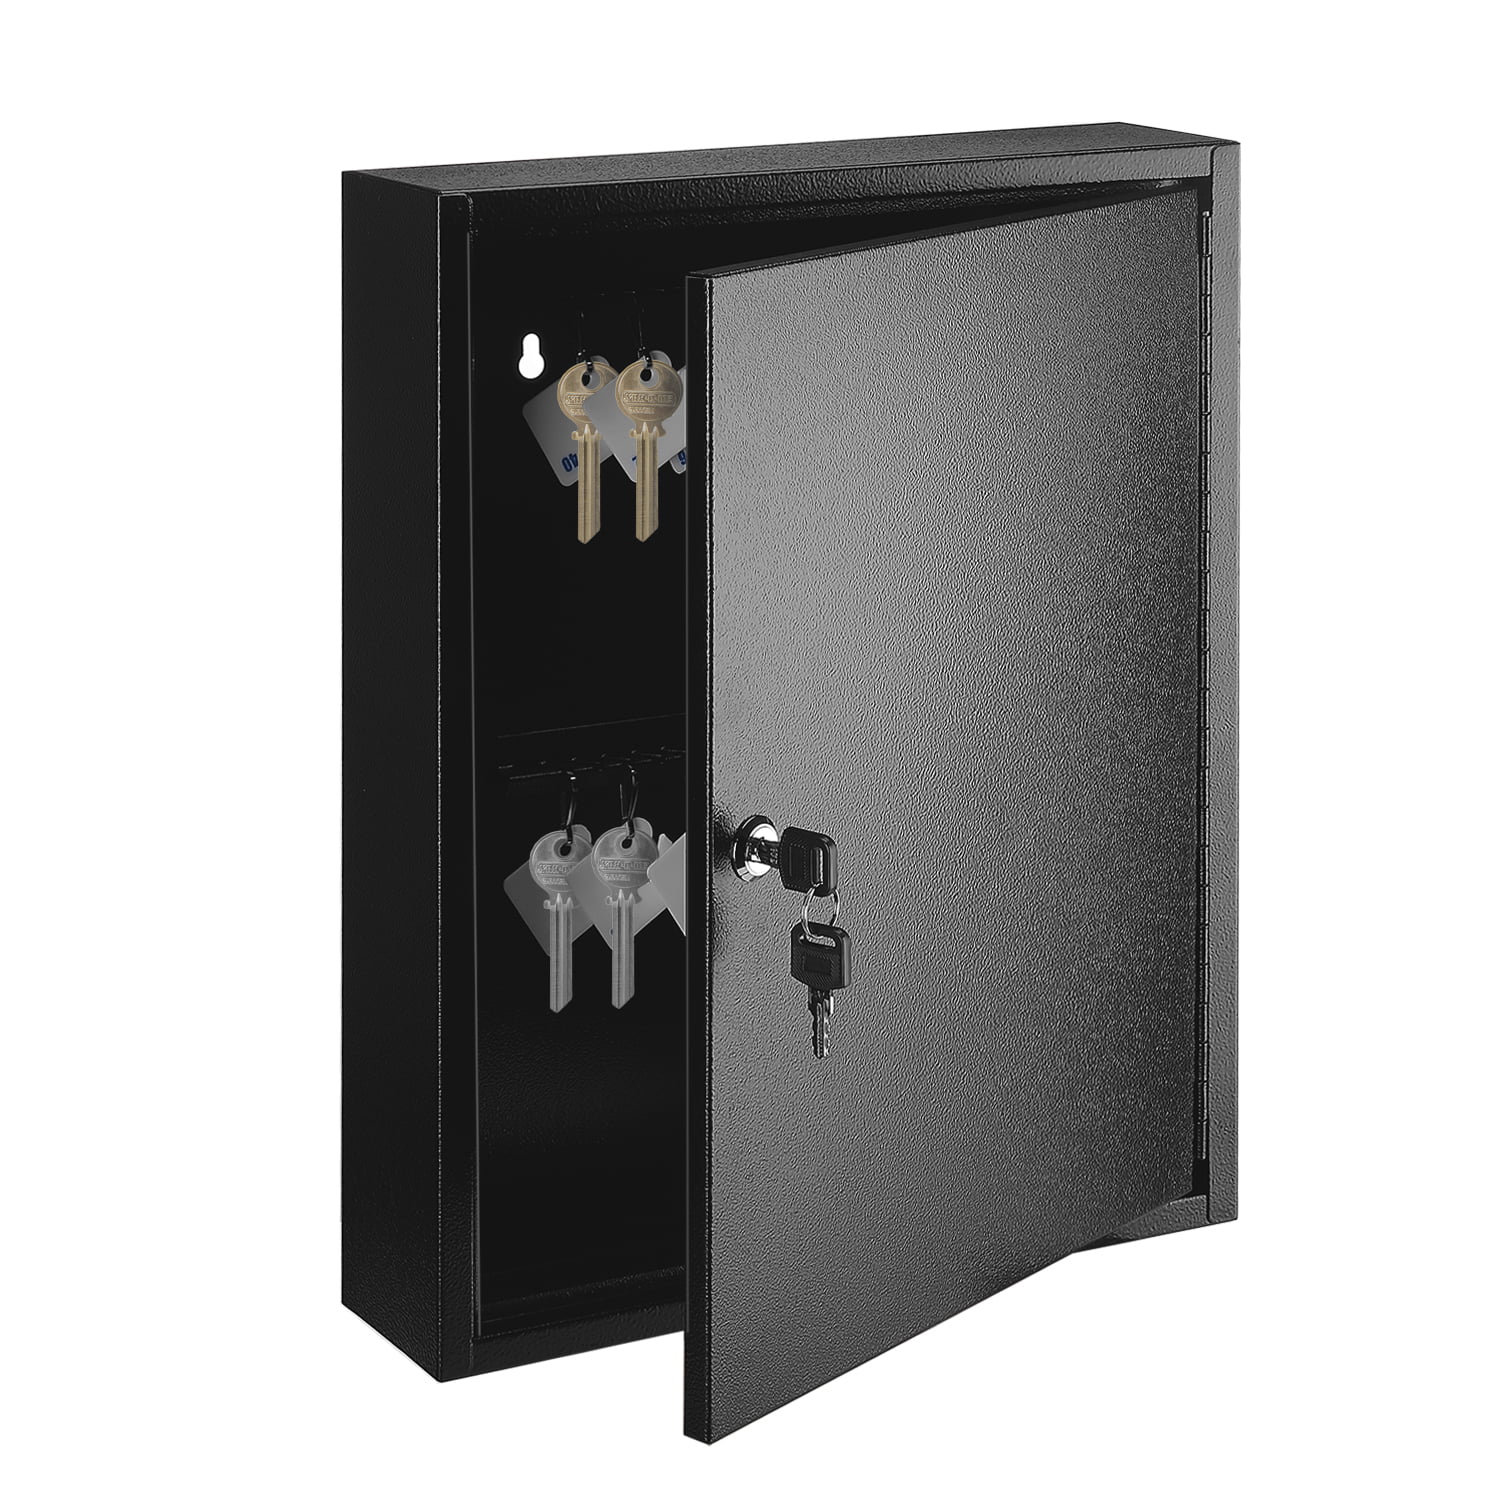 Security Storage Lock Box System for Homes Hotels Schools or Business Black Flexzion Key Cabinet Steel Lock Box with 60 Capacity Colored Key Tags & Hooks Wall Mounted Safe Organizer 